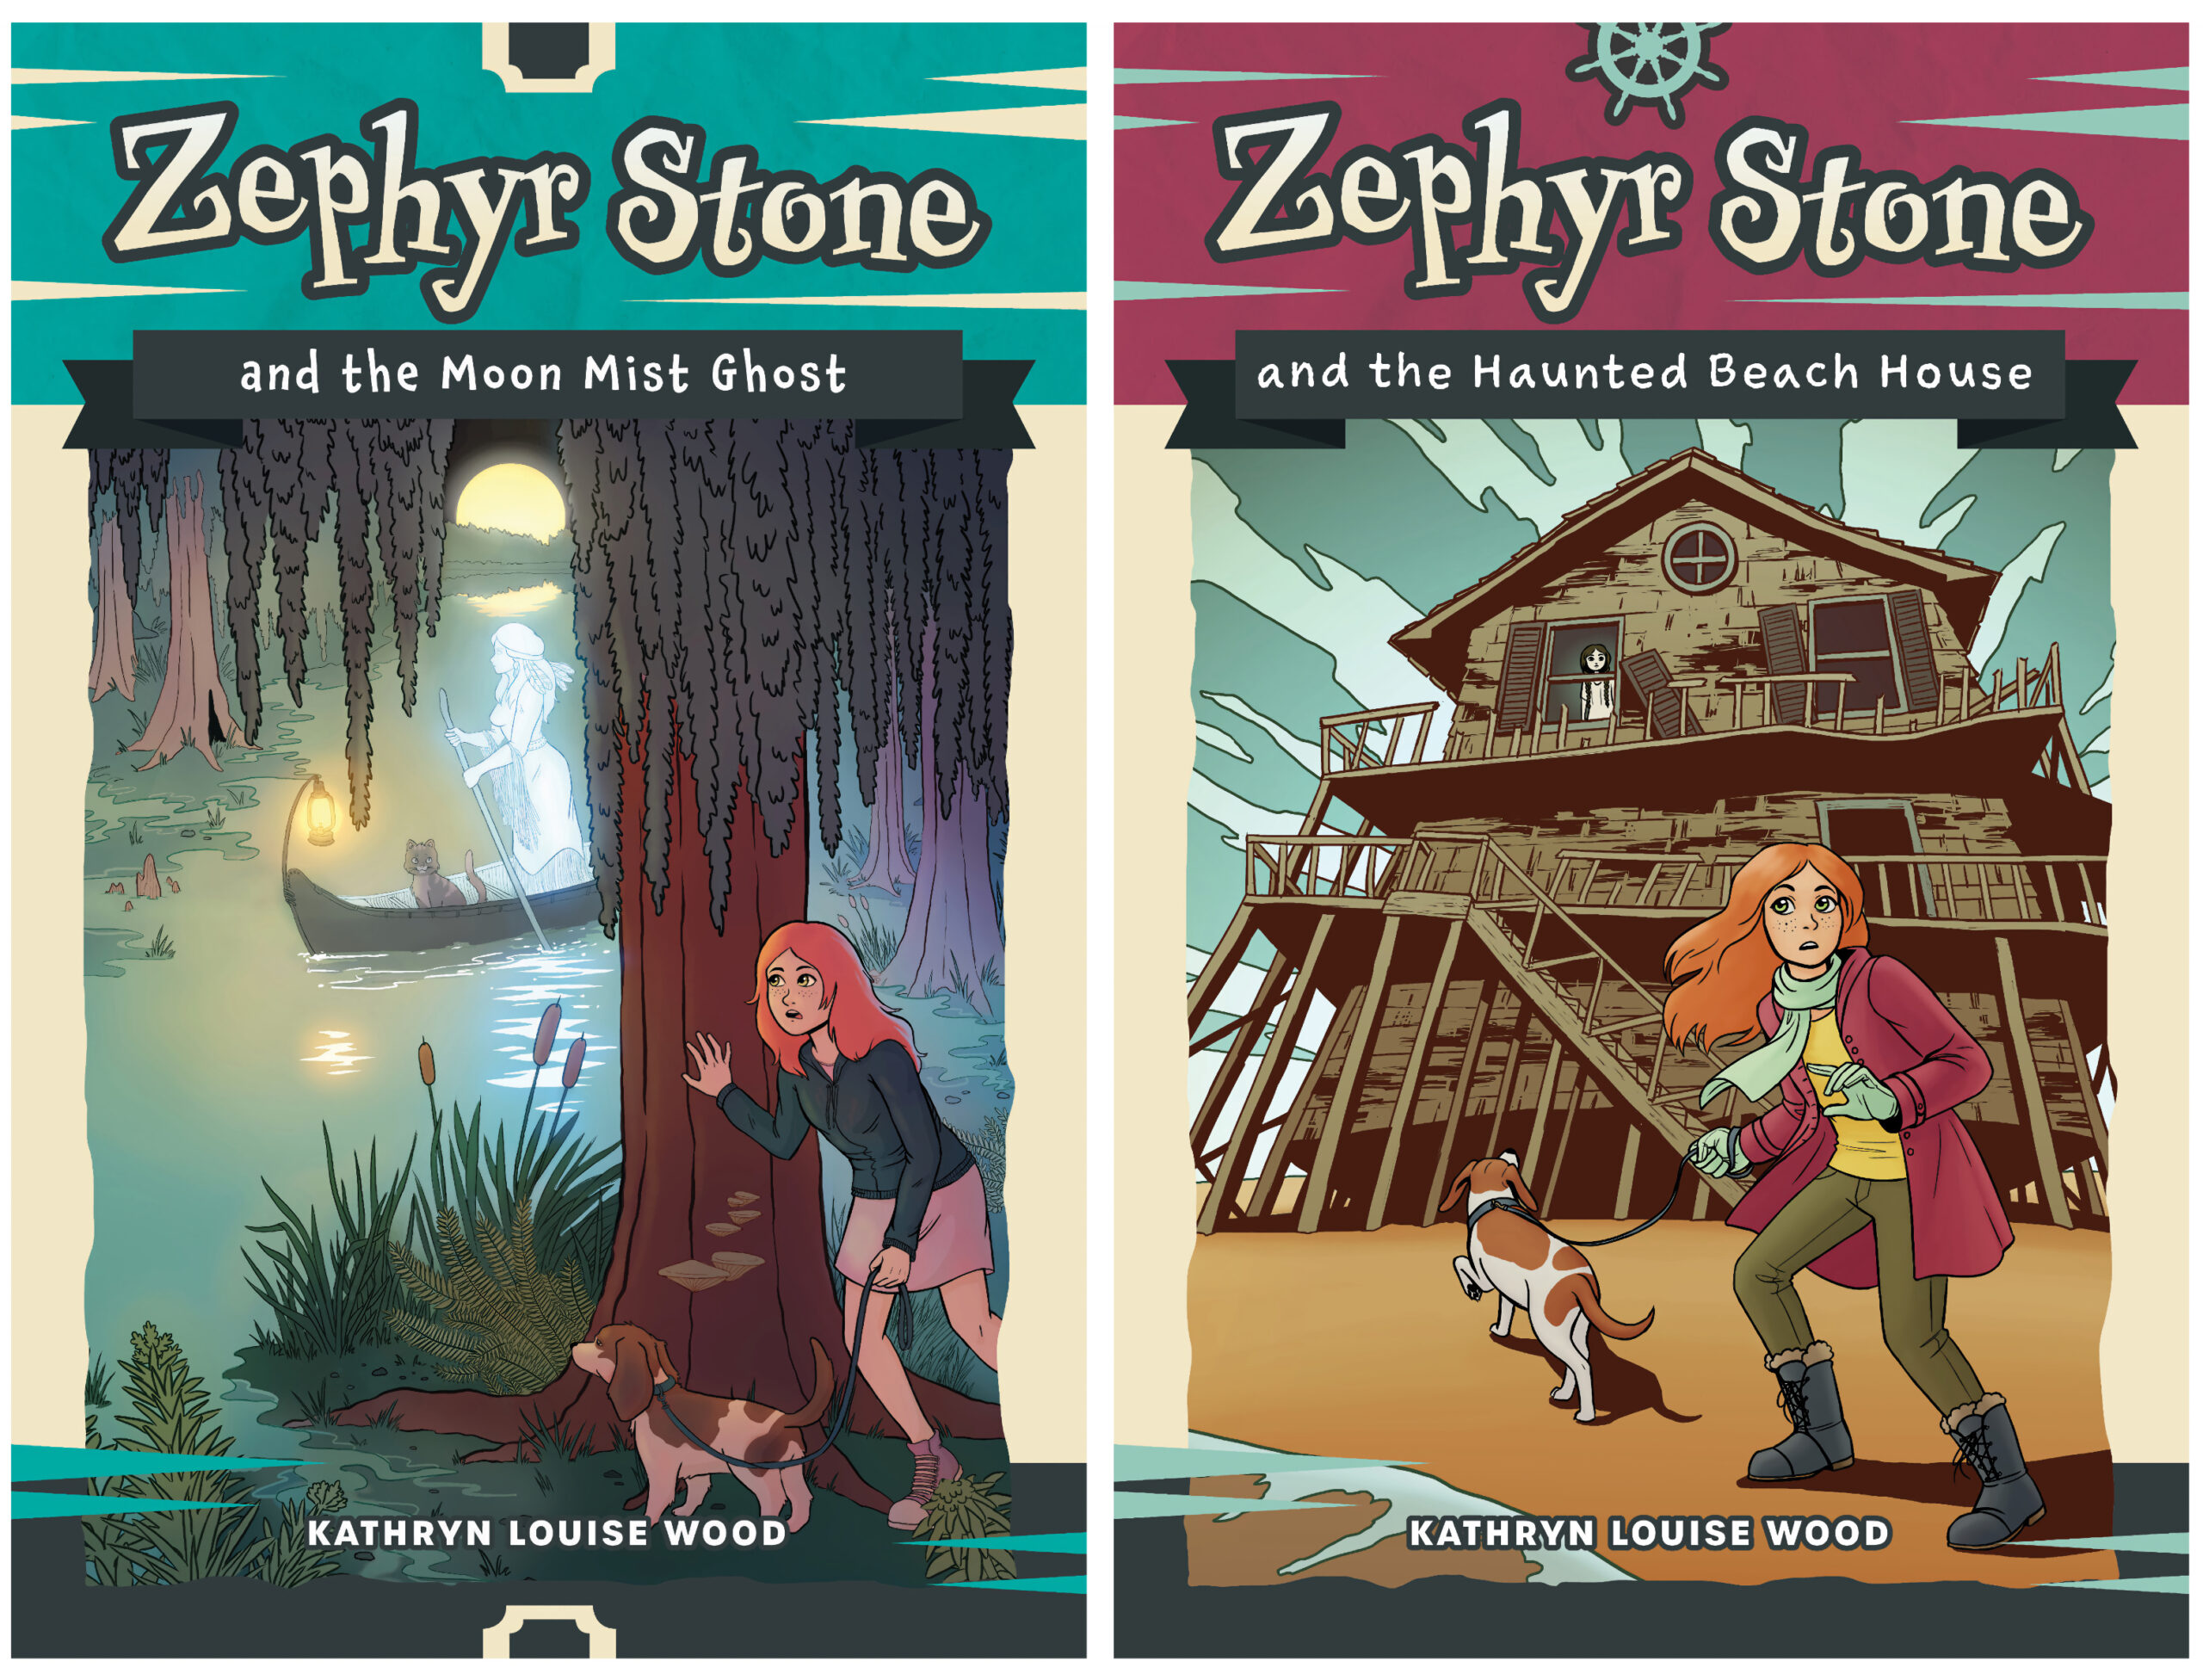 Book Covers- Zephyr Stone and the Moon Mist Ghost and Zephyr Stone and the Haunted Beach House